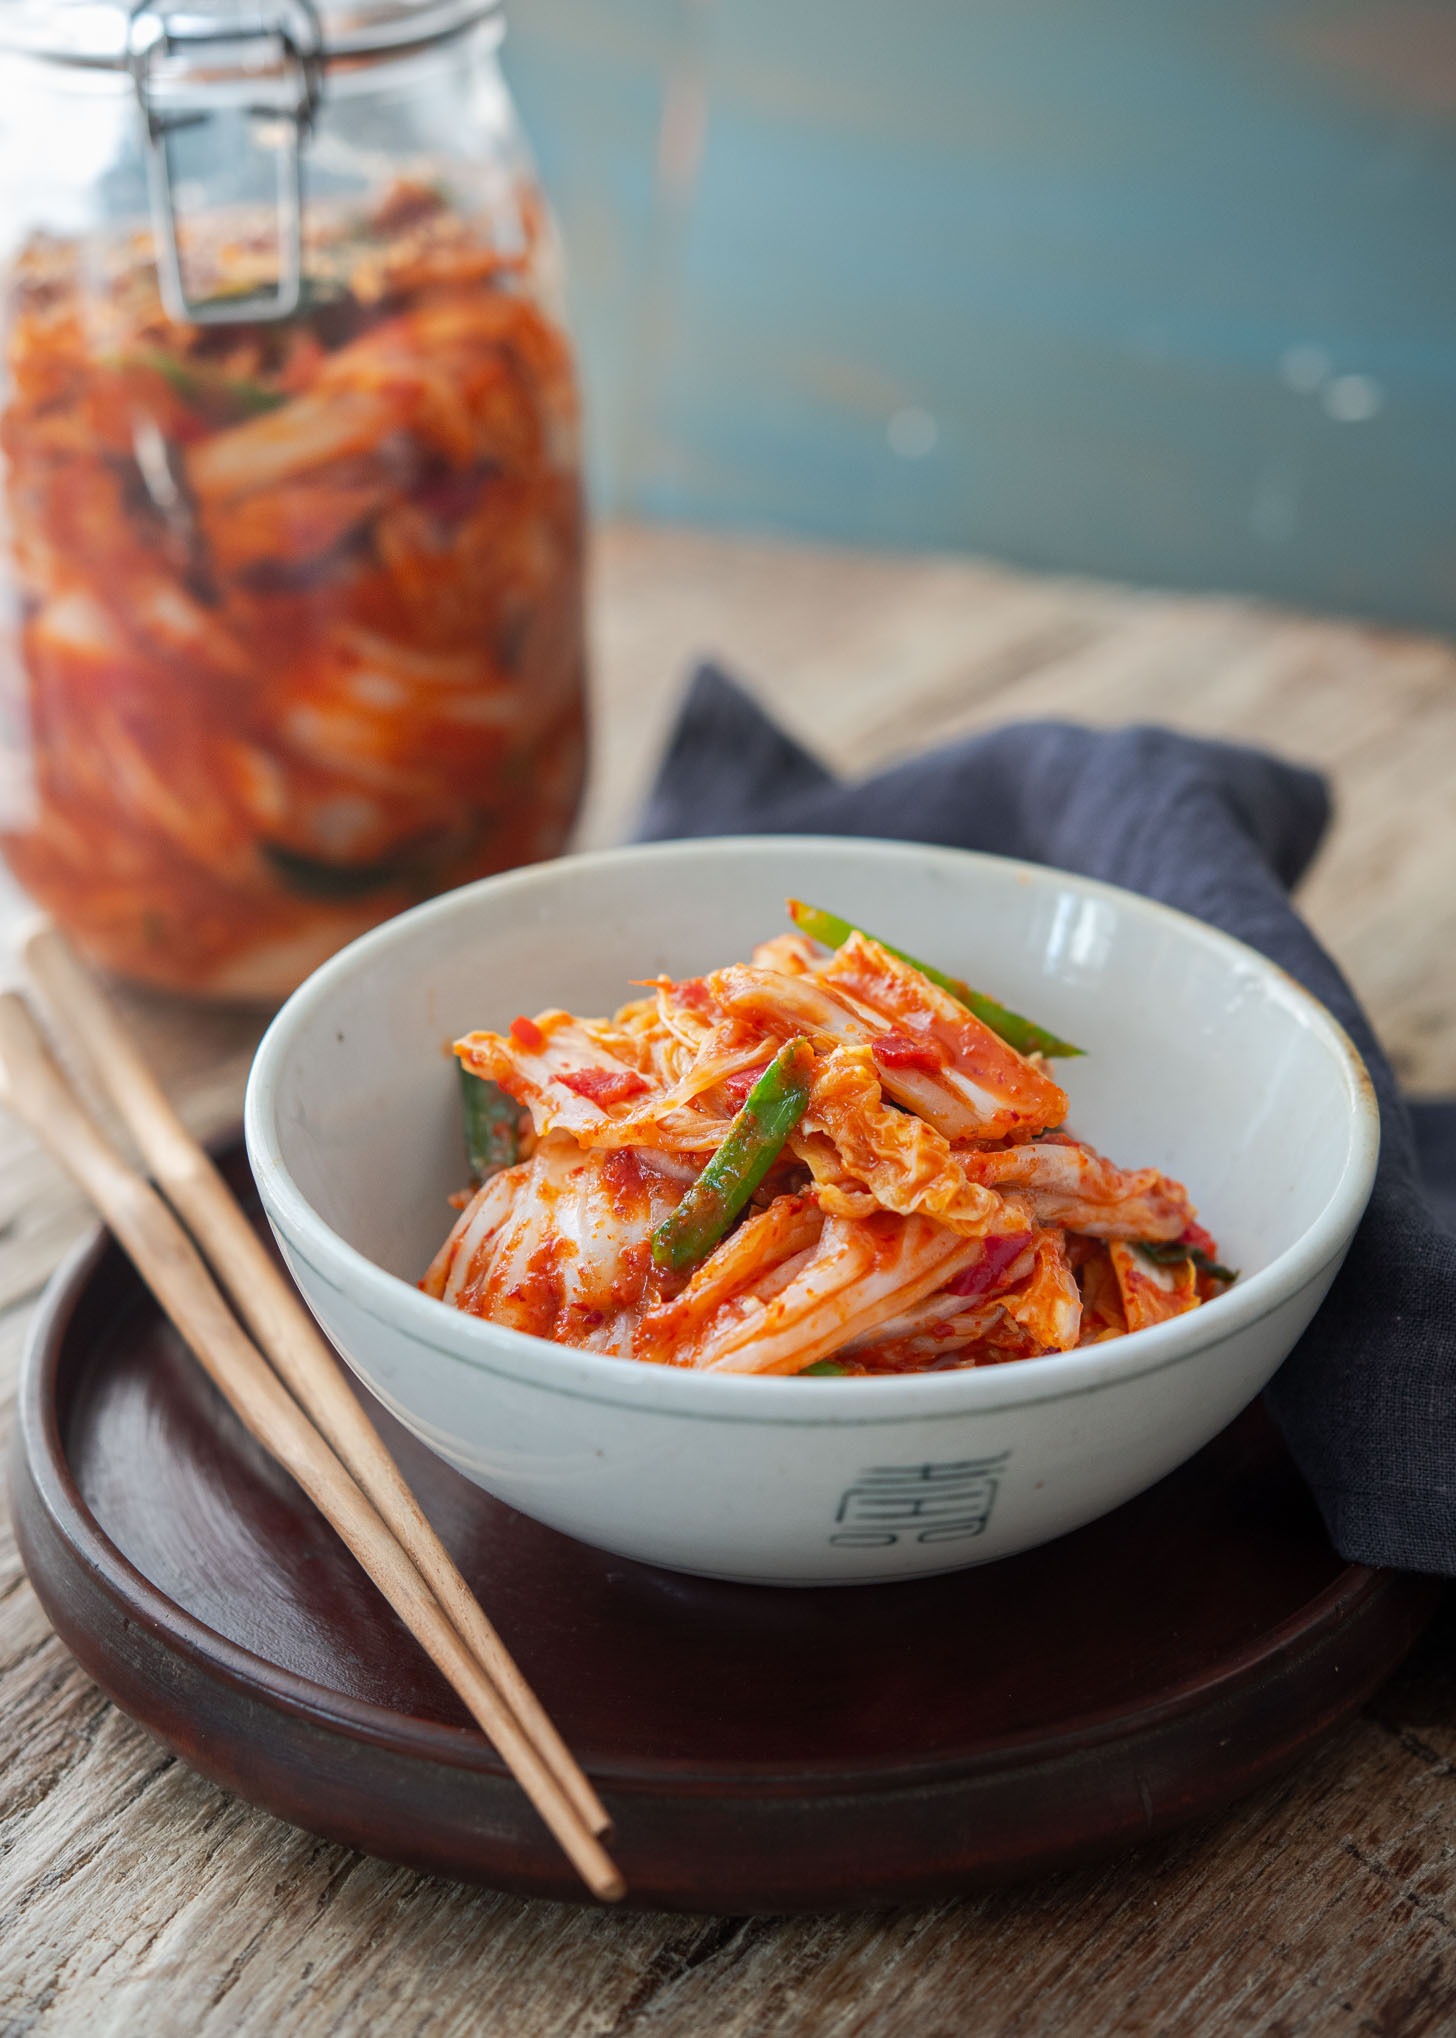 A bowl of freshly made vegan kimchi is placed on a round tray with wooden chopsticks.